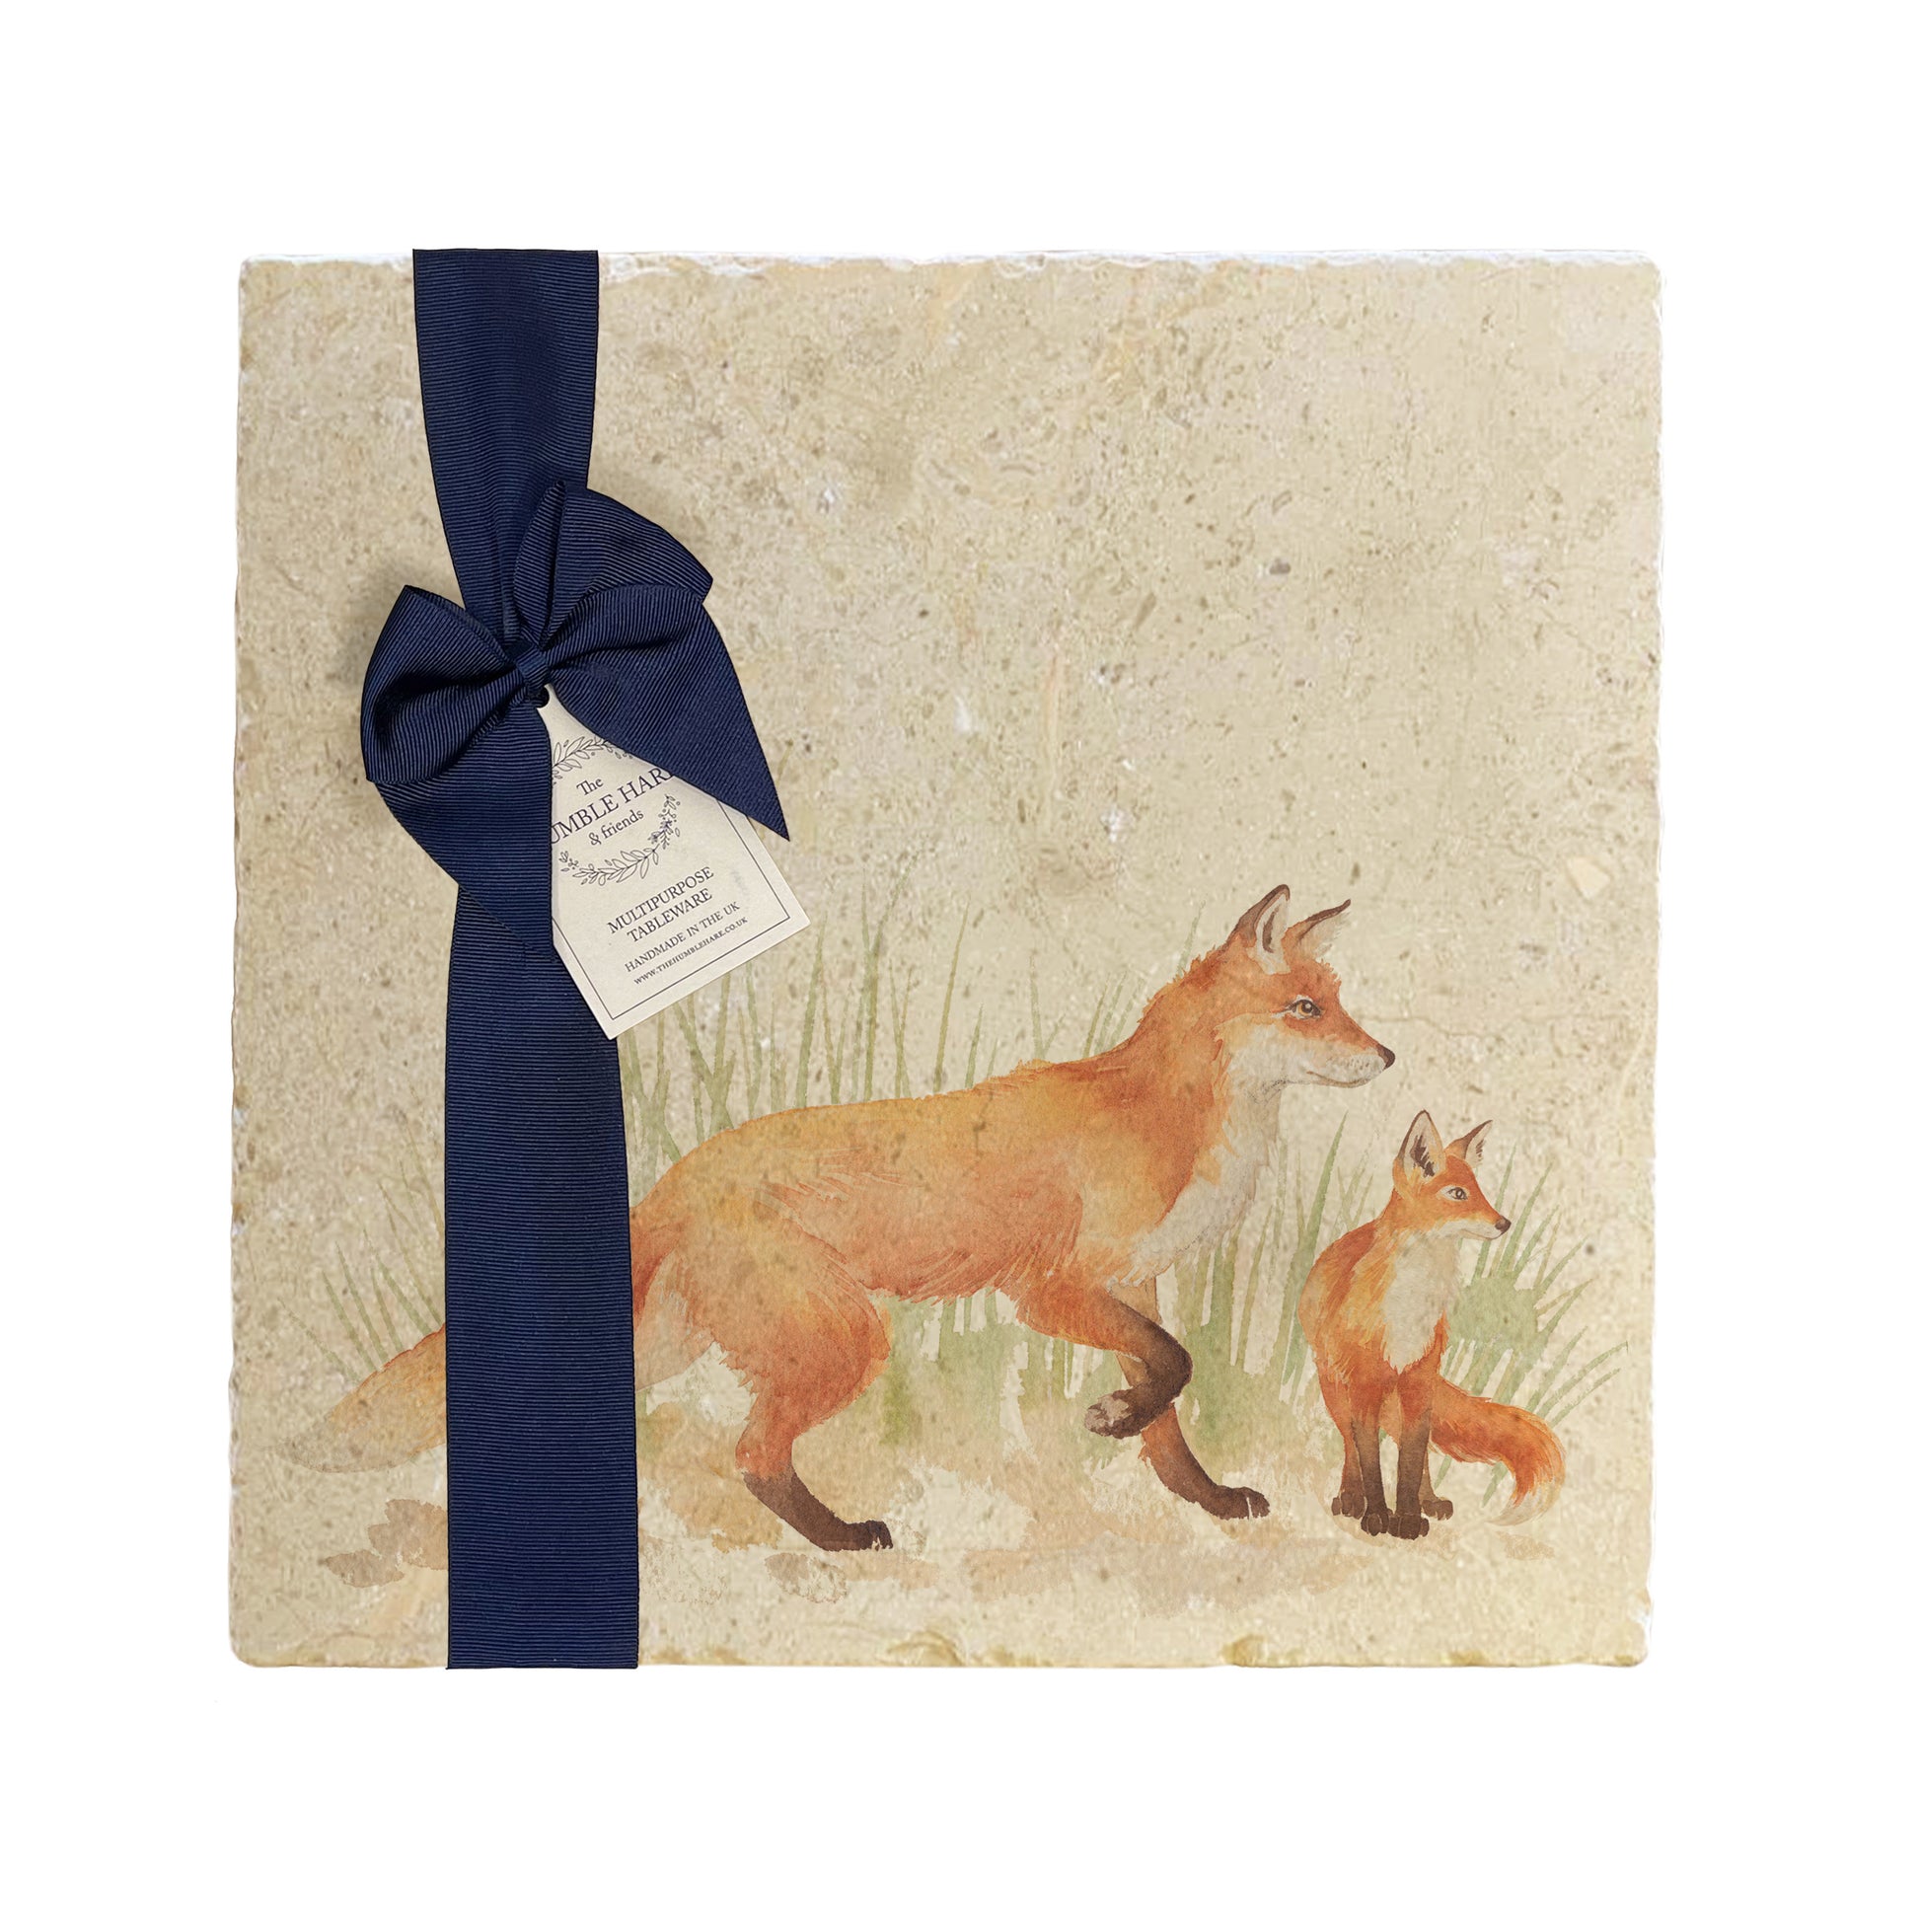 A multipurpose marble platter with a fox and fox cub design, packaged with a luxurious dark blue bow and branded gift tag.